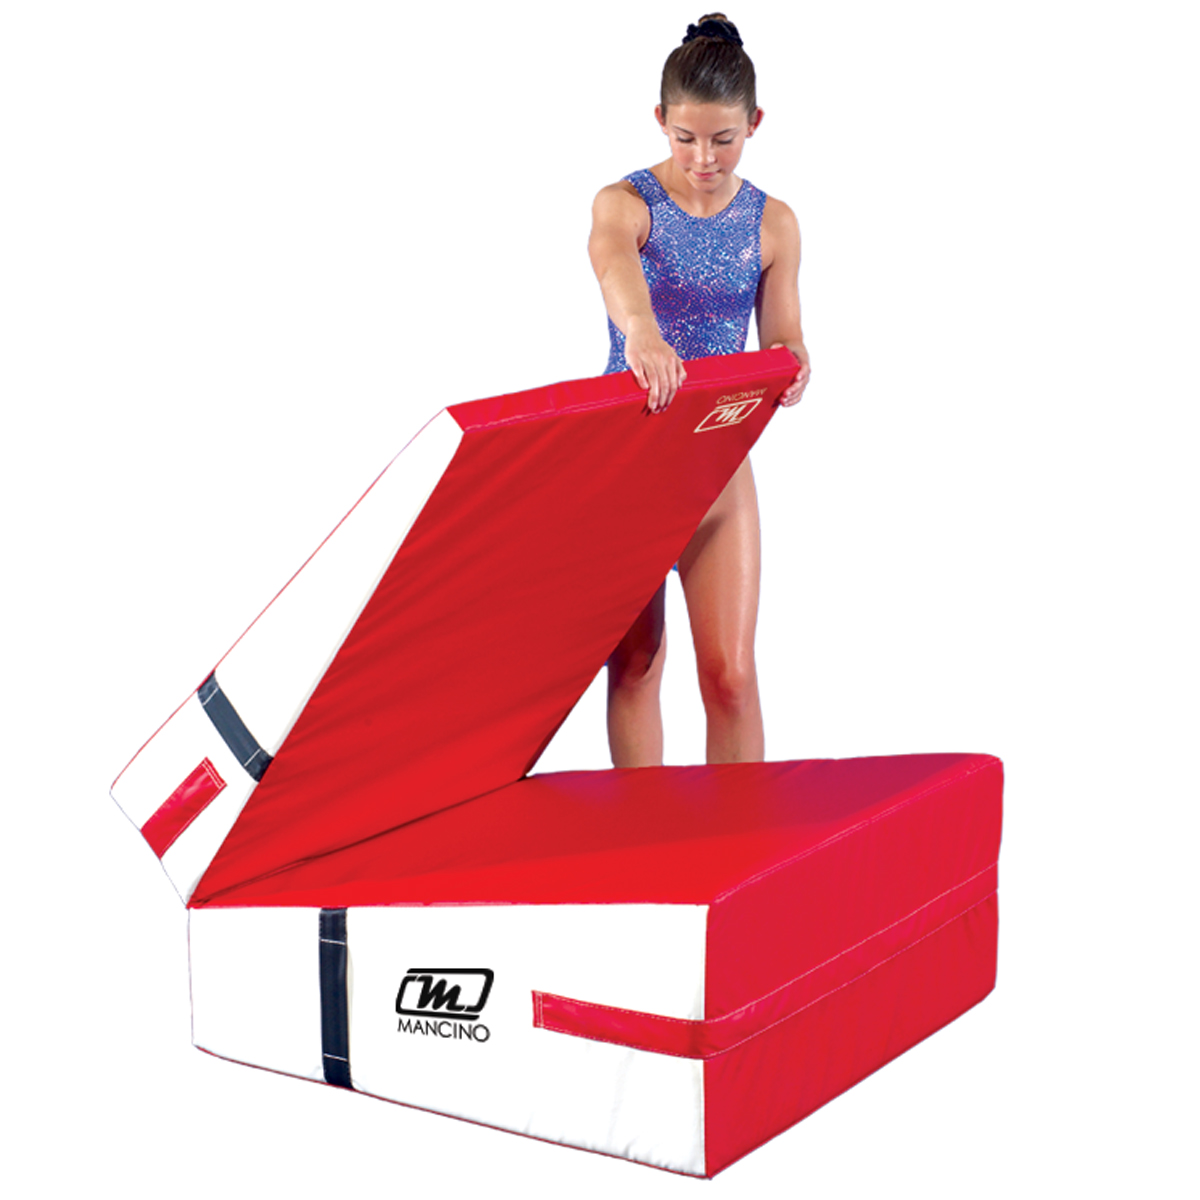 We Sell Mats Gymnastics Incline Mat, Cheese Wedge Skill Shape, Tumbling Mat  for Gymnastics Training, Cheerleading and Obstacle Courses